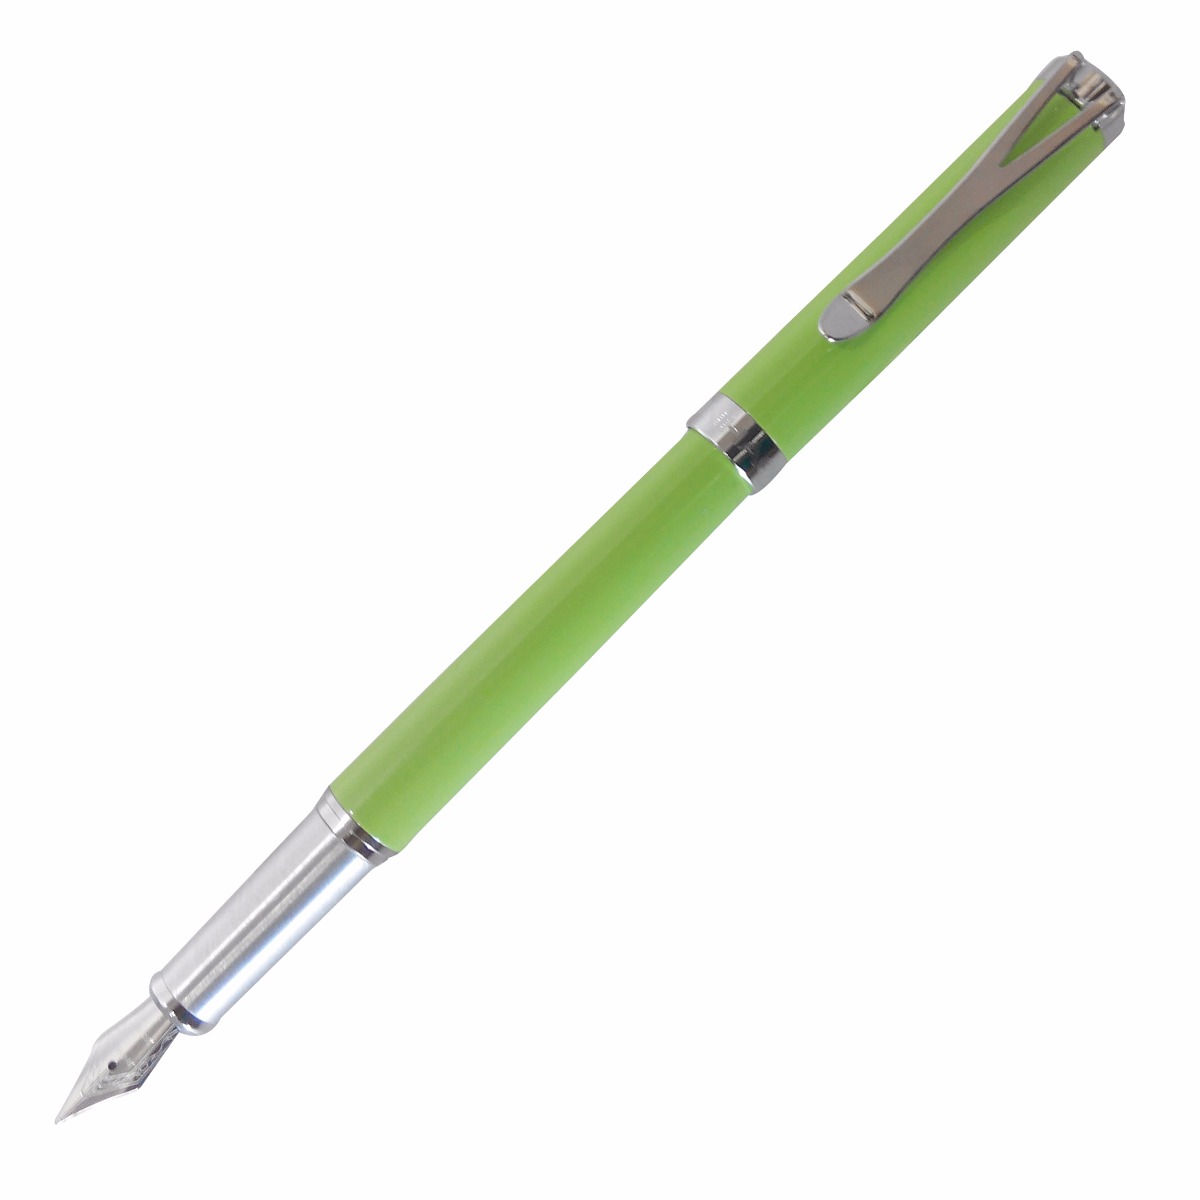 JINHAO GREEN COLOR BODY CAP TYPE OPEN WITH BLUE STONE HEAD FOUNTAIN PEN MODEL: 11498